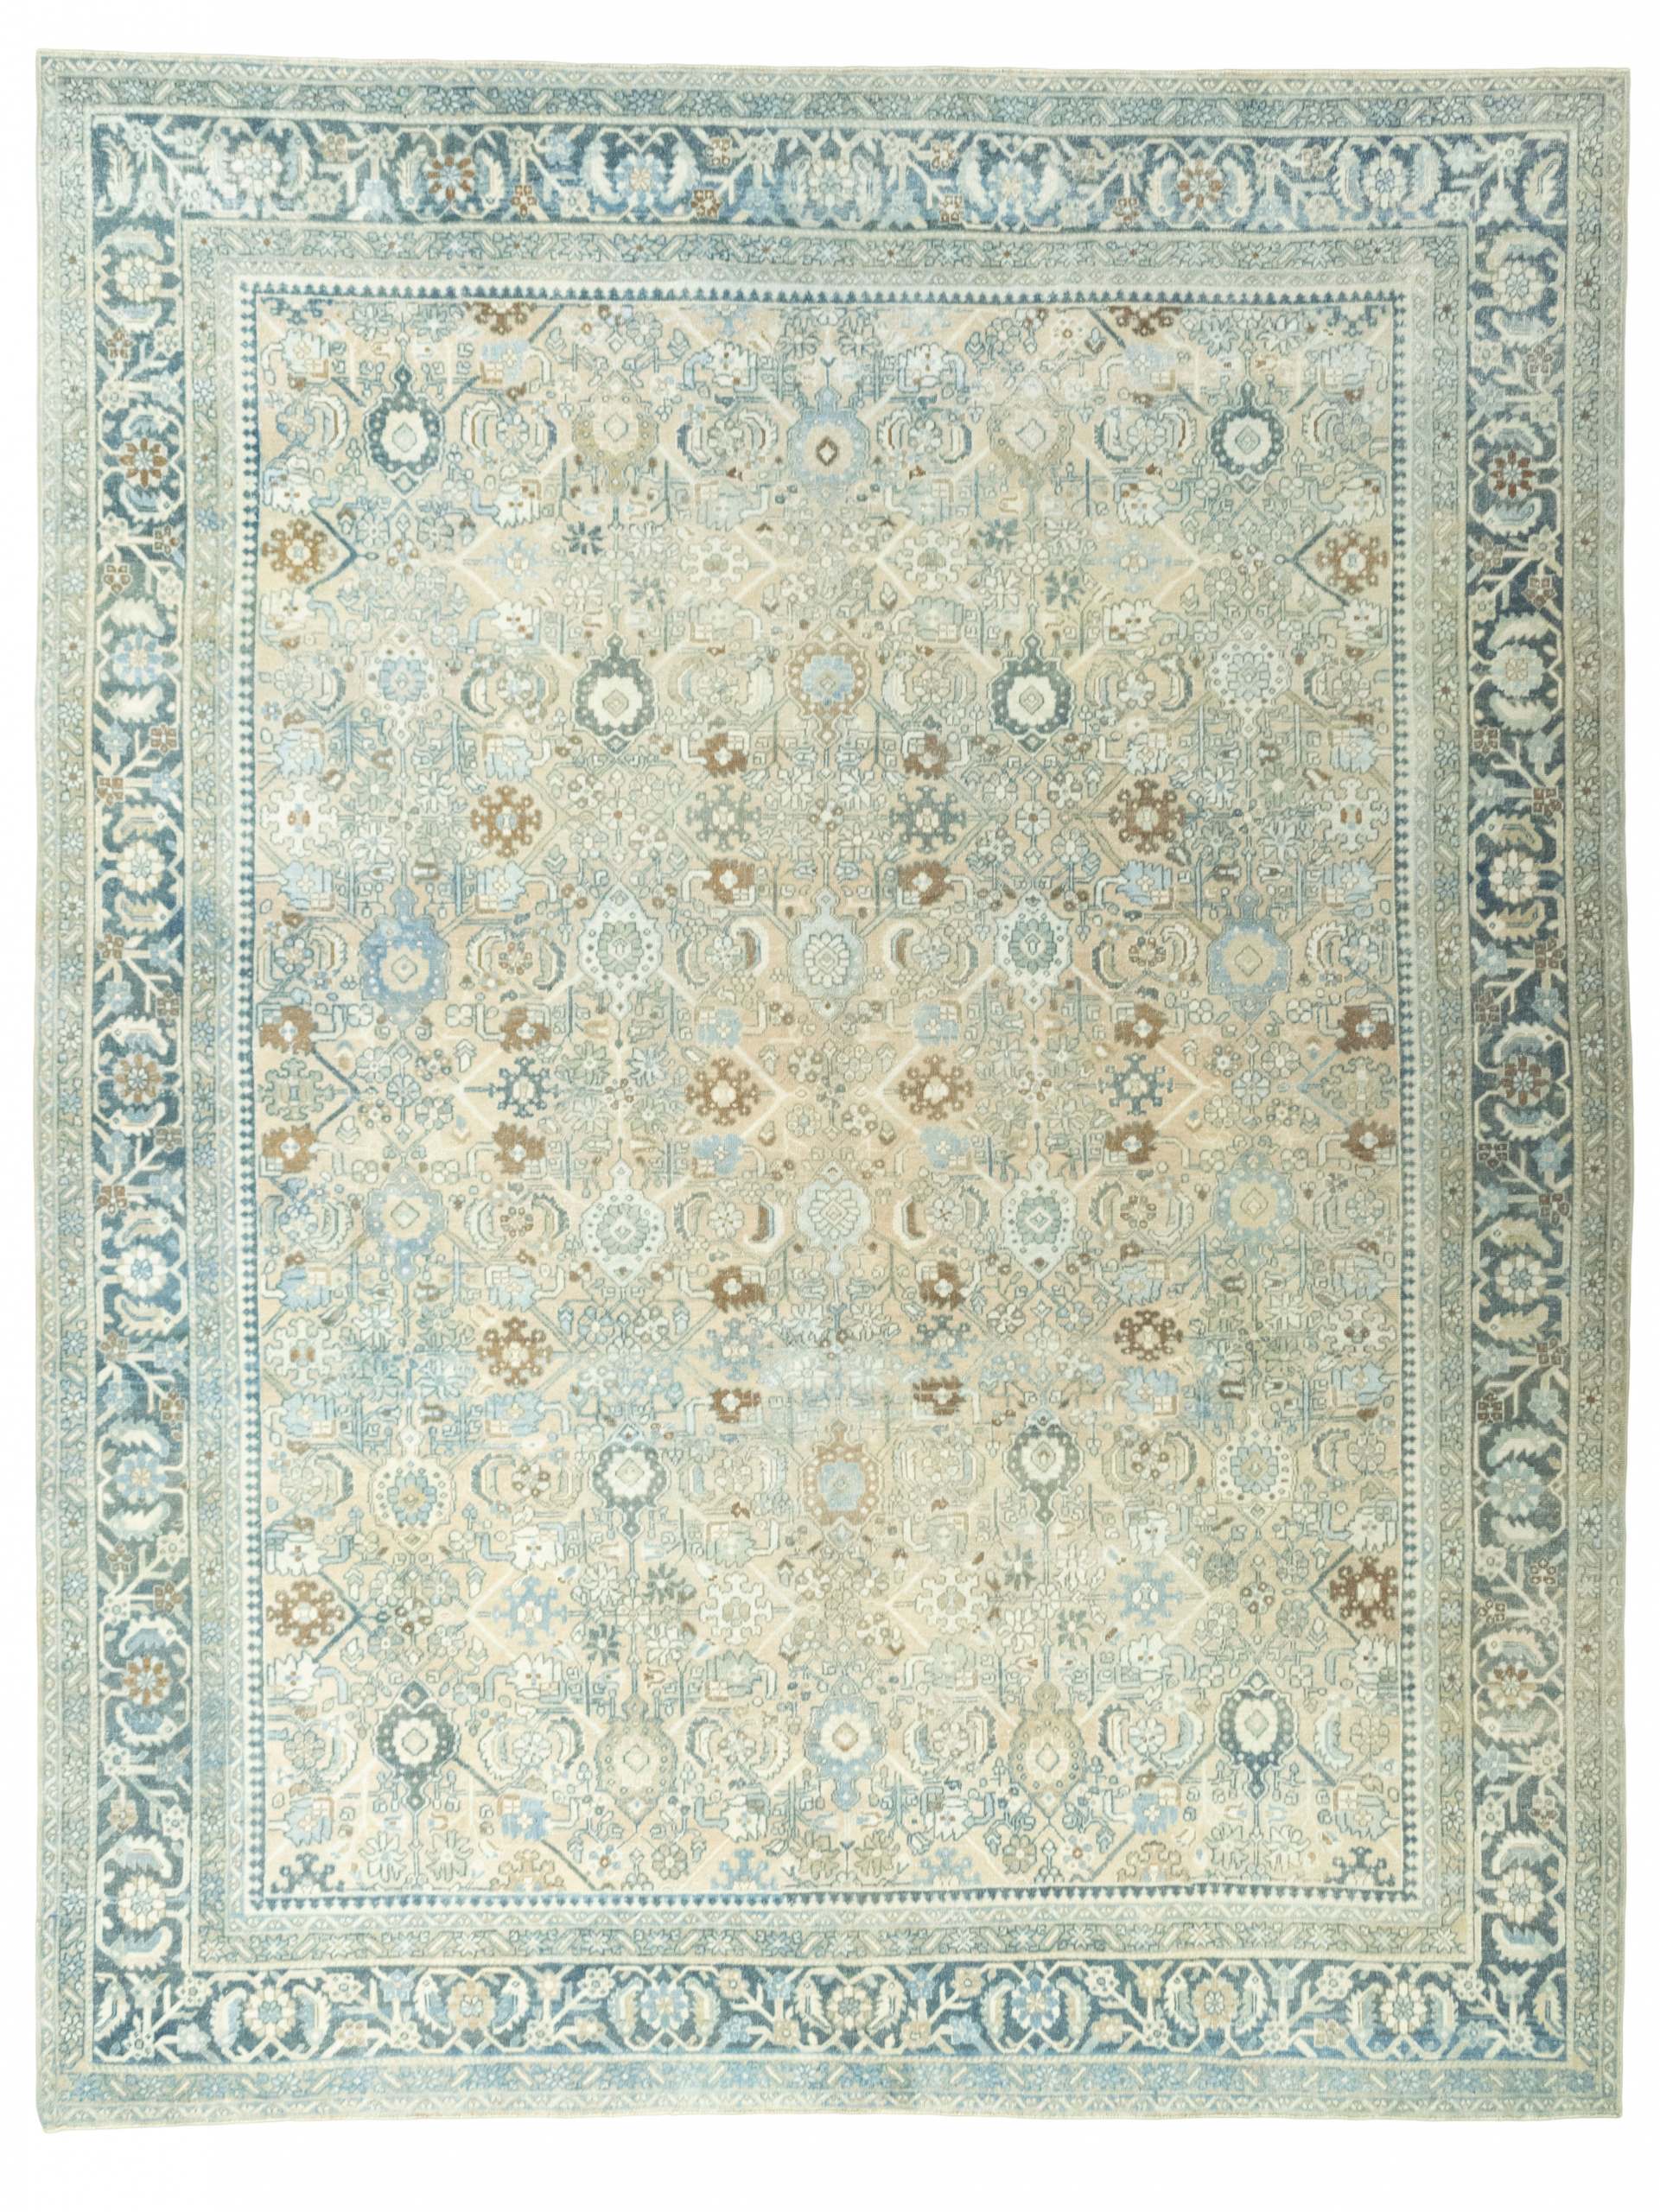 Old style rug comes with one of a kind antique style. 